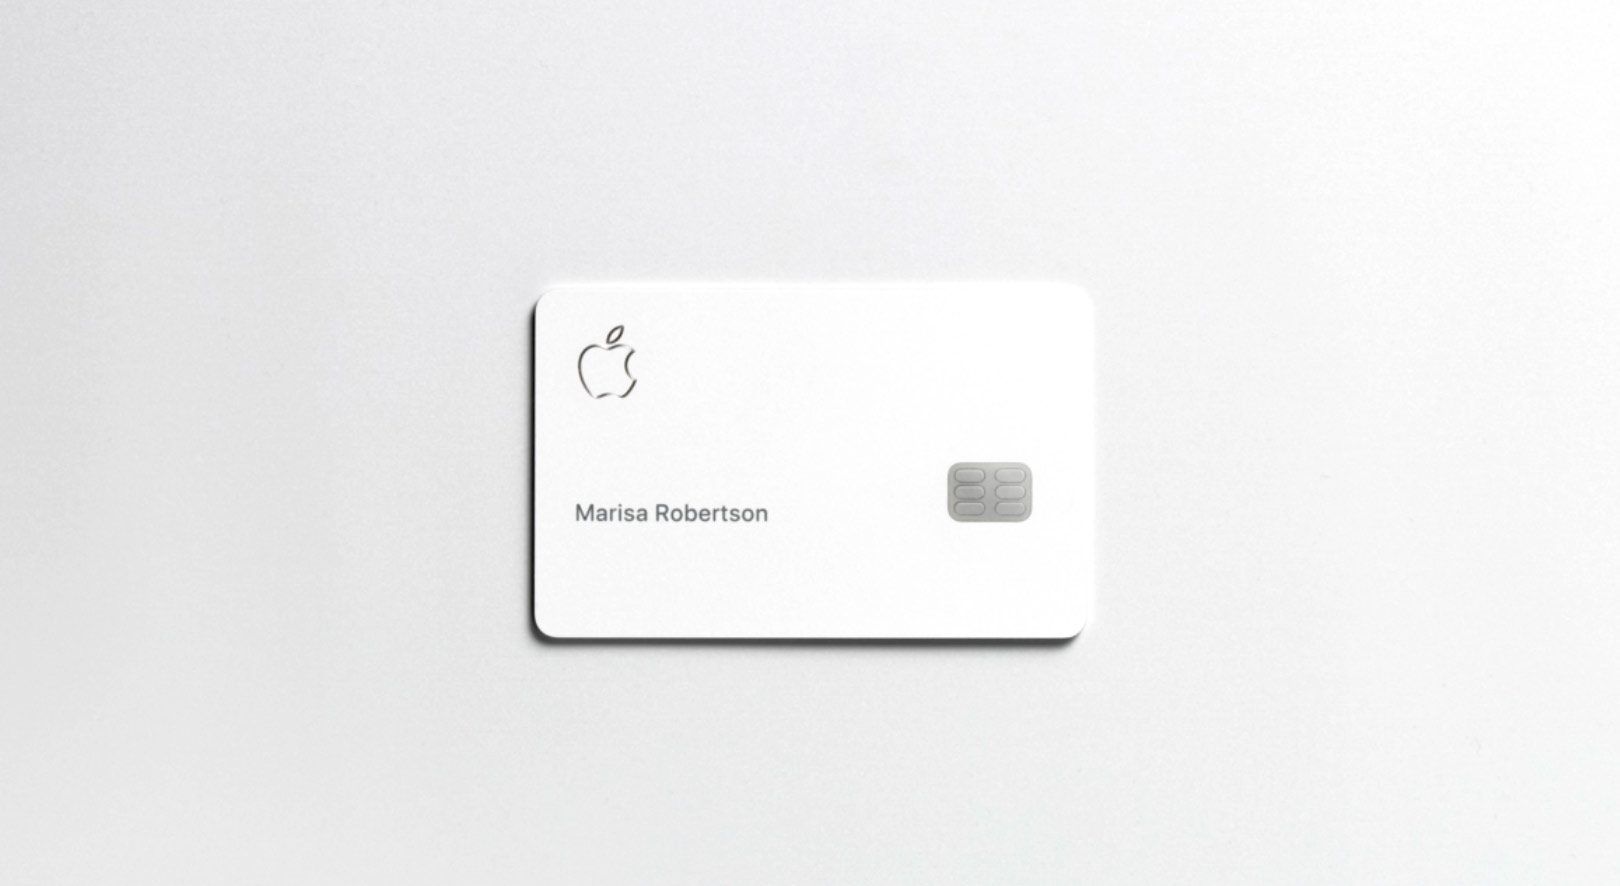 The metal design of Apple Card with the laser engraved name